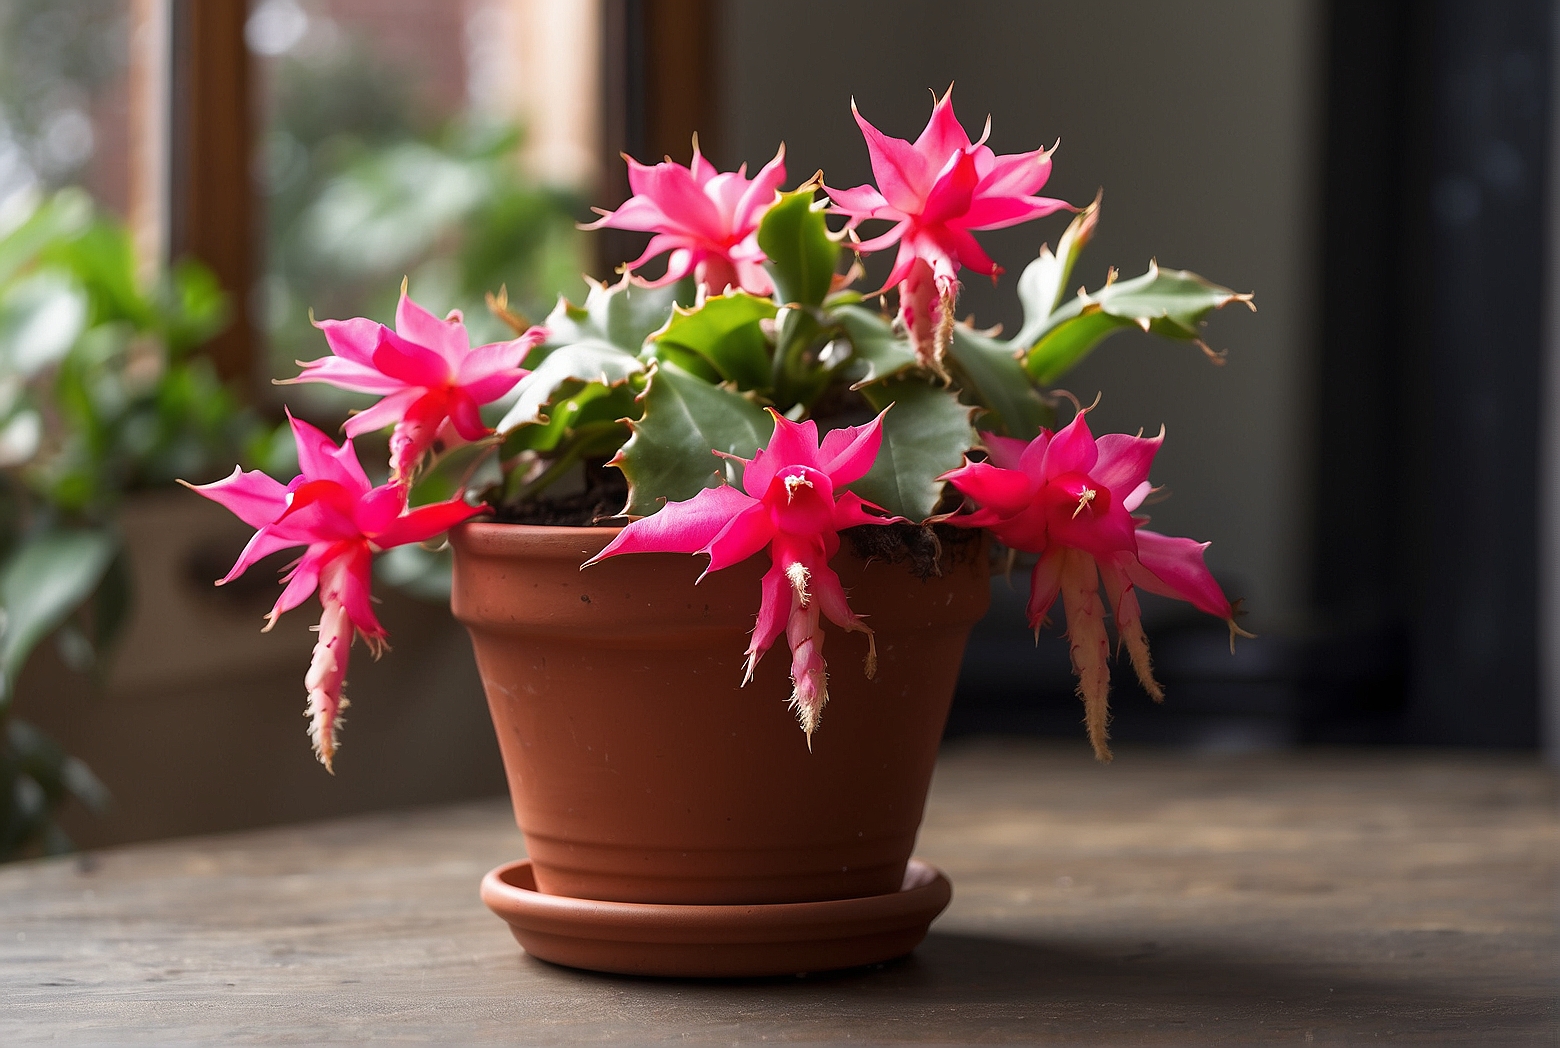 Why is my Christmas cactus losing leaves?